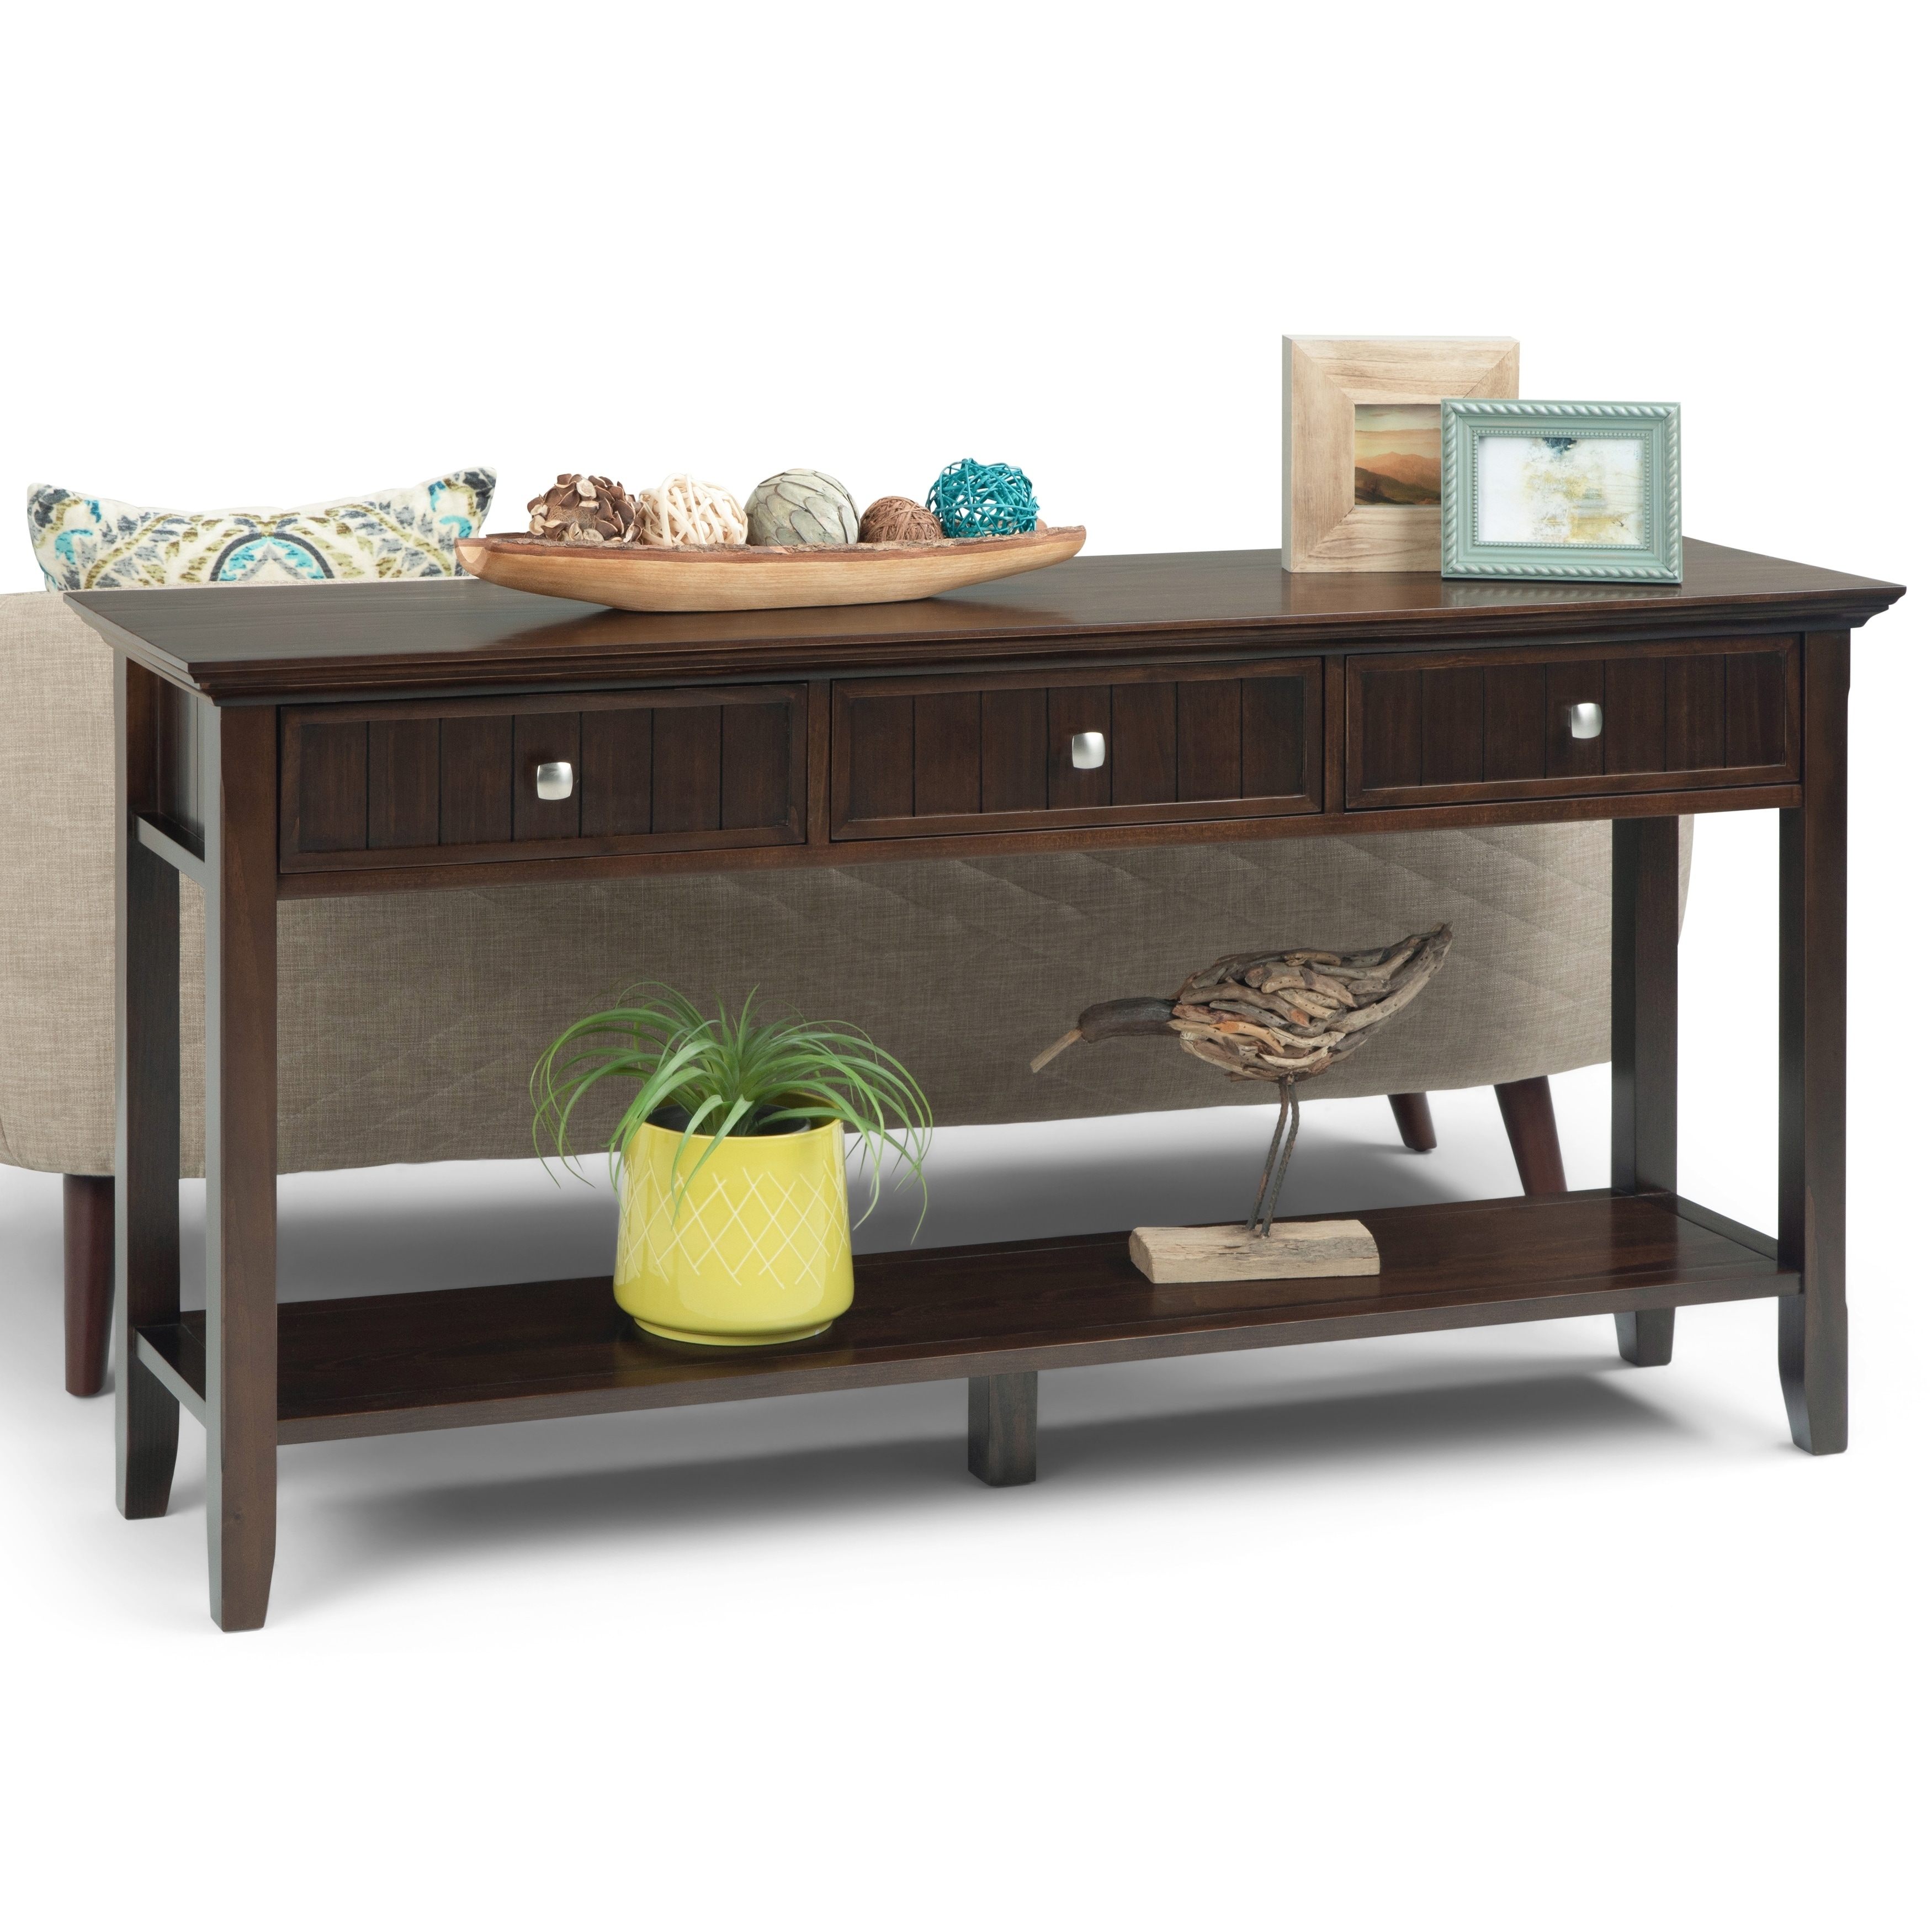 30 inch wide sofa table